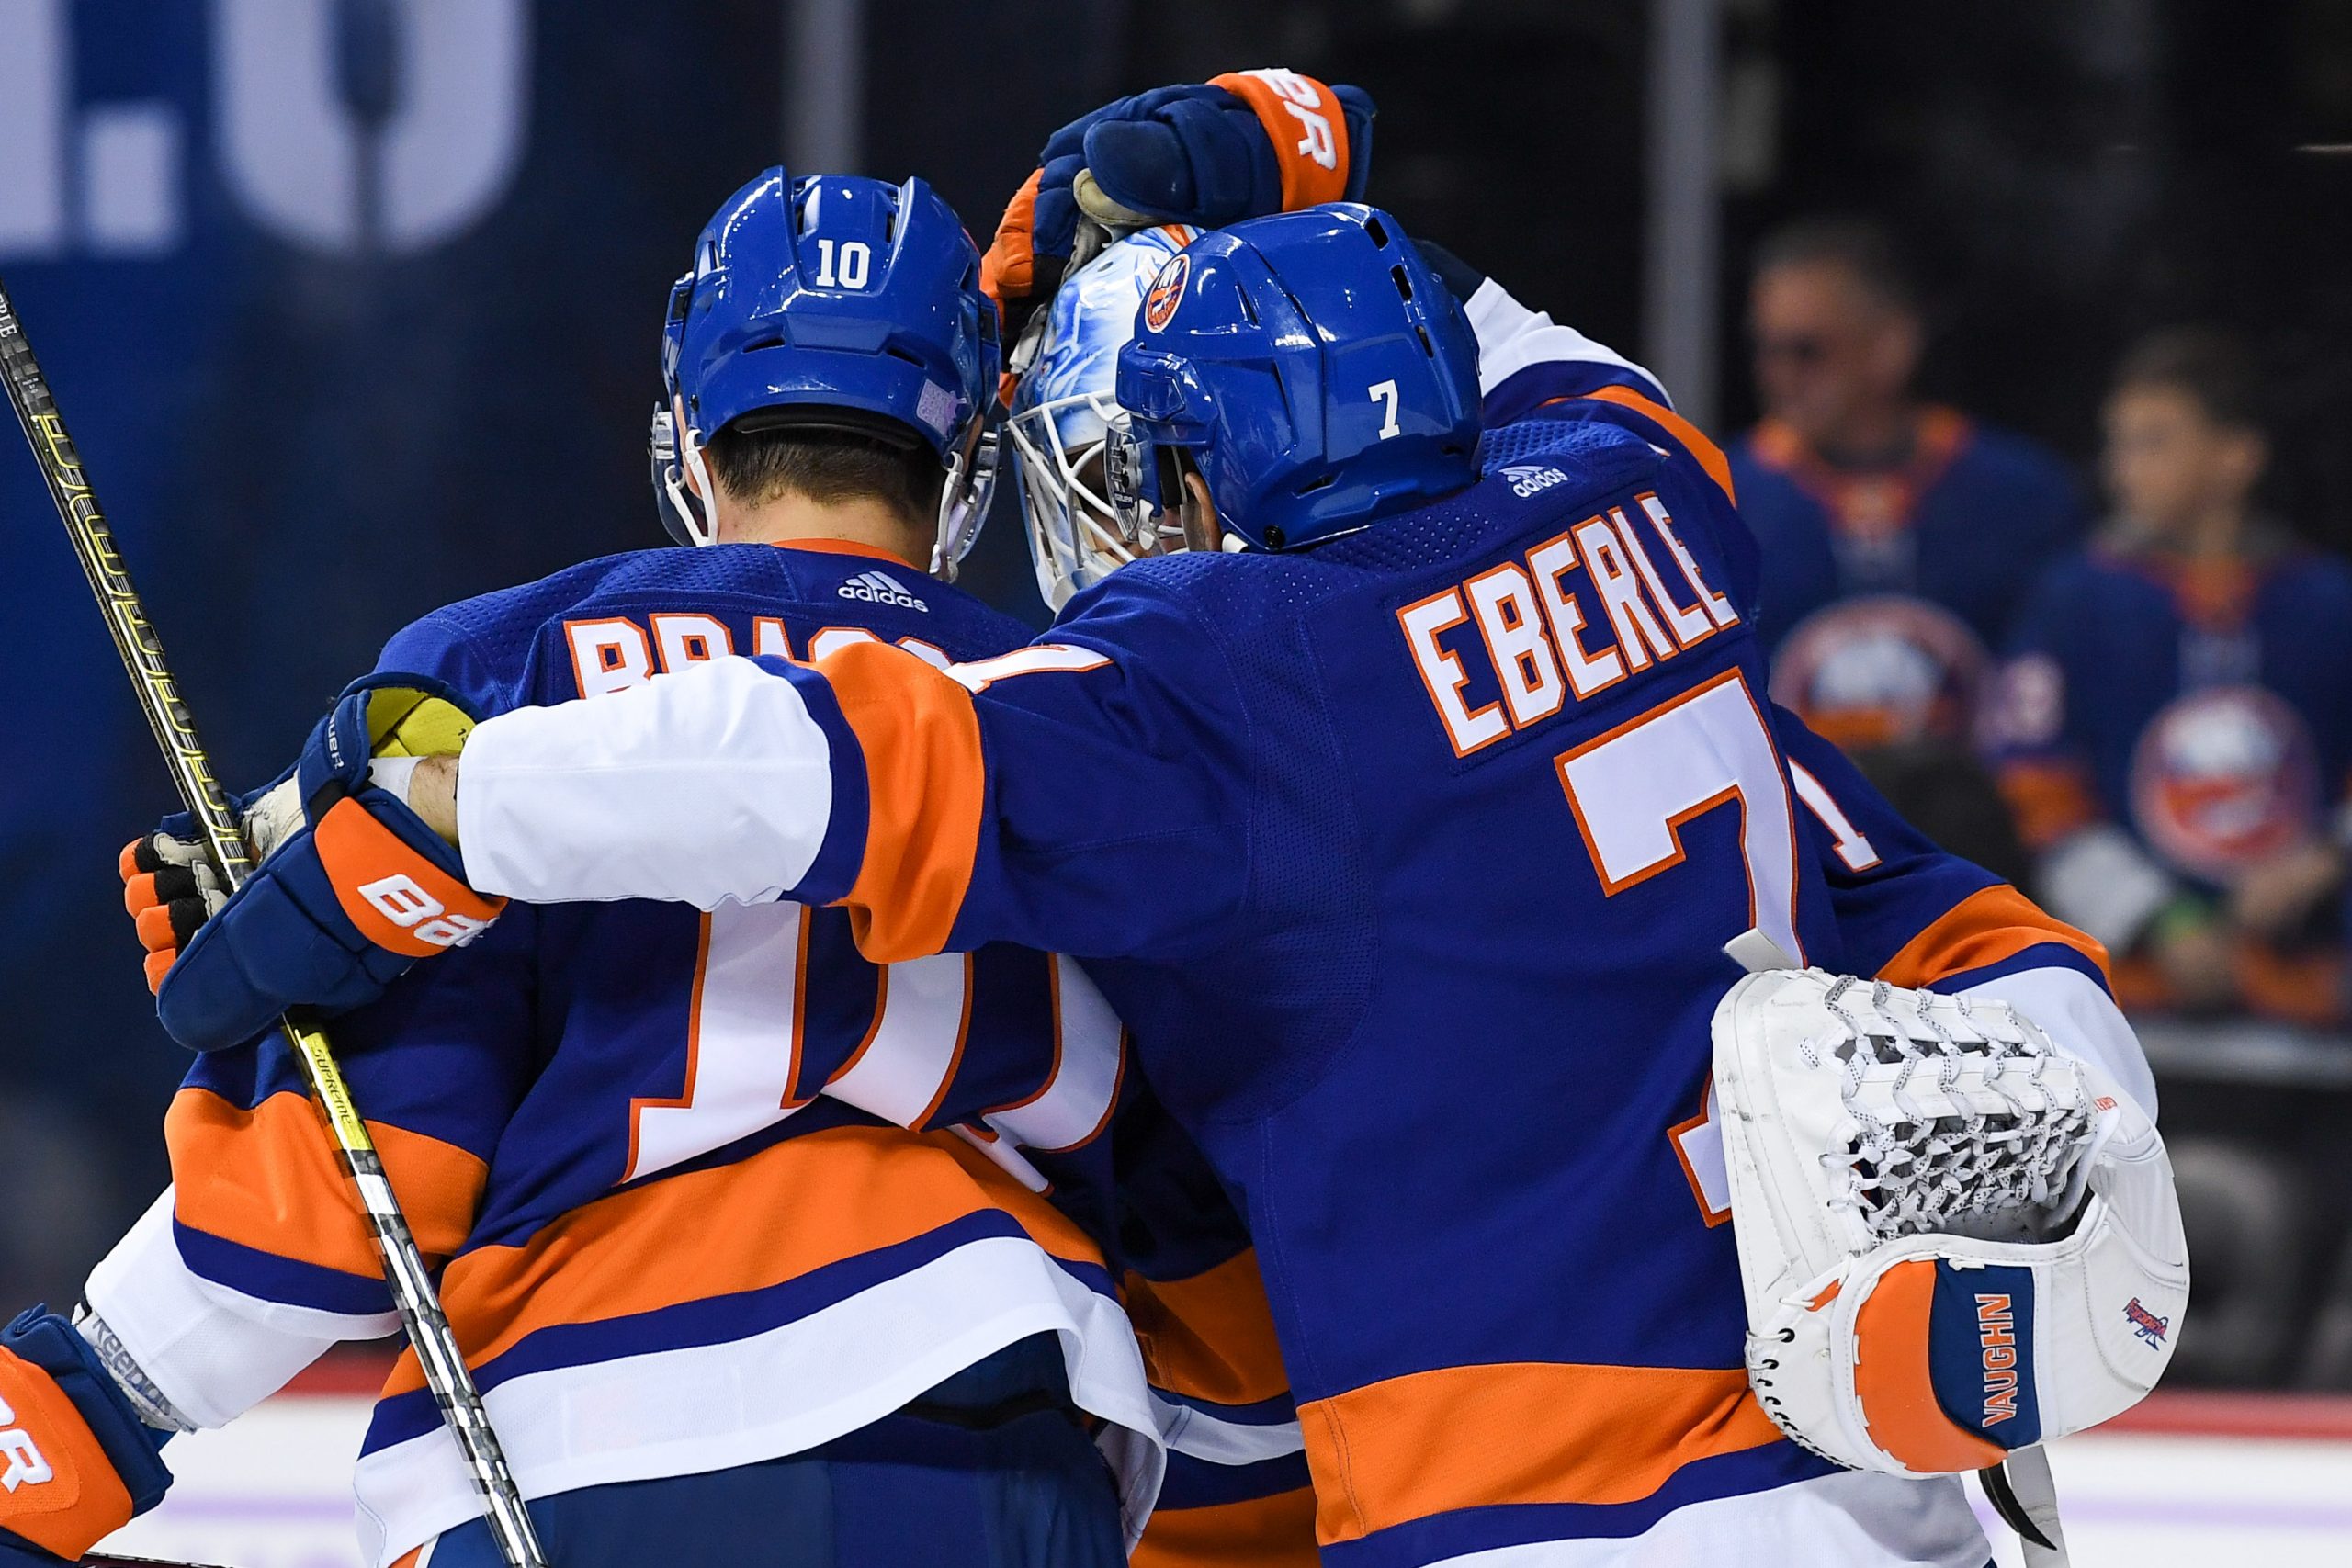 Nov 9, 2019; Brooklyn, NY, USA; New York Islanders center Jordan Eberle (7) and center Derick Brassard (10) congratulate goaltender Thomas Greiss (1) after a 2-1 victory over the Florida Panthers at Barclays Center. Mandatory Credit: Dennis Schneidler-USA TODAY Sports